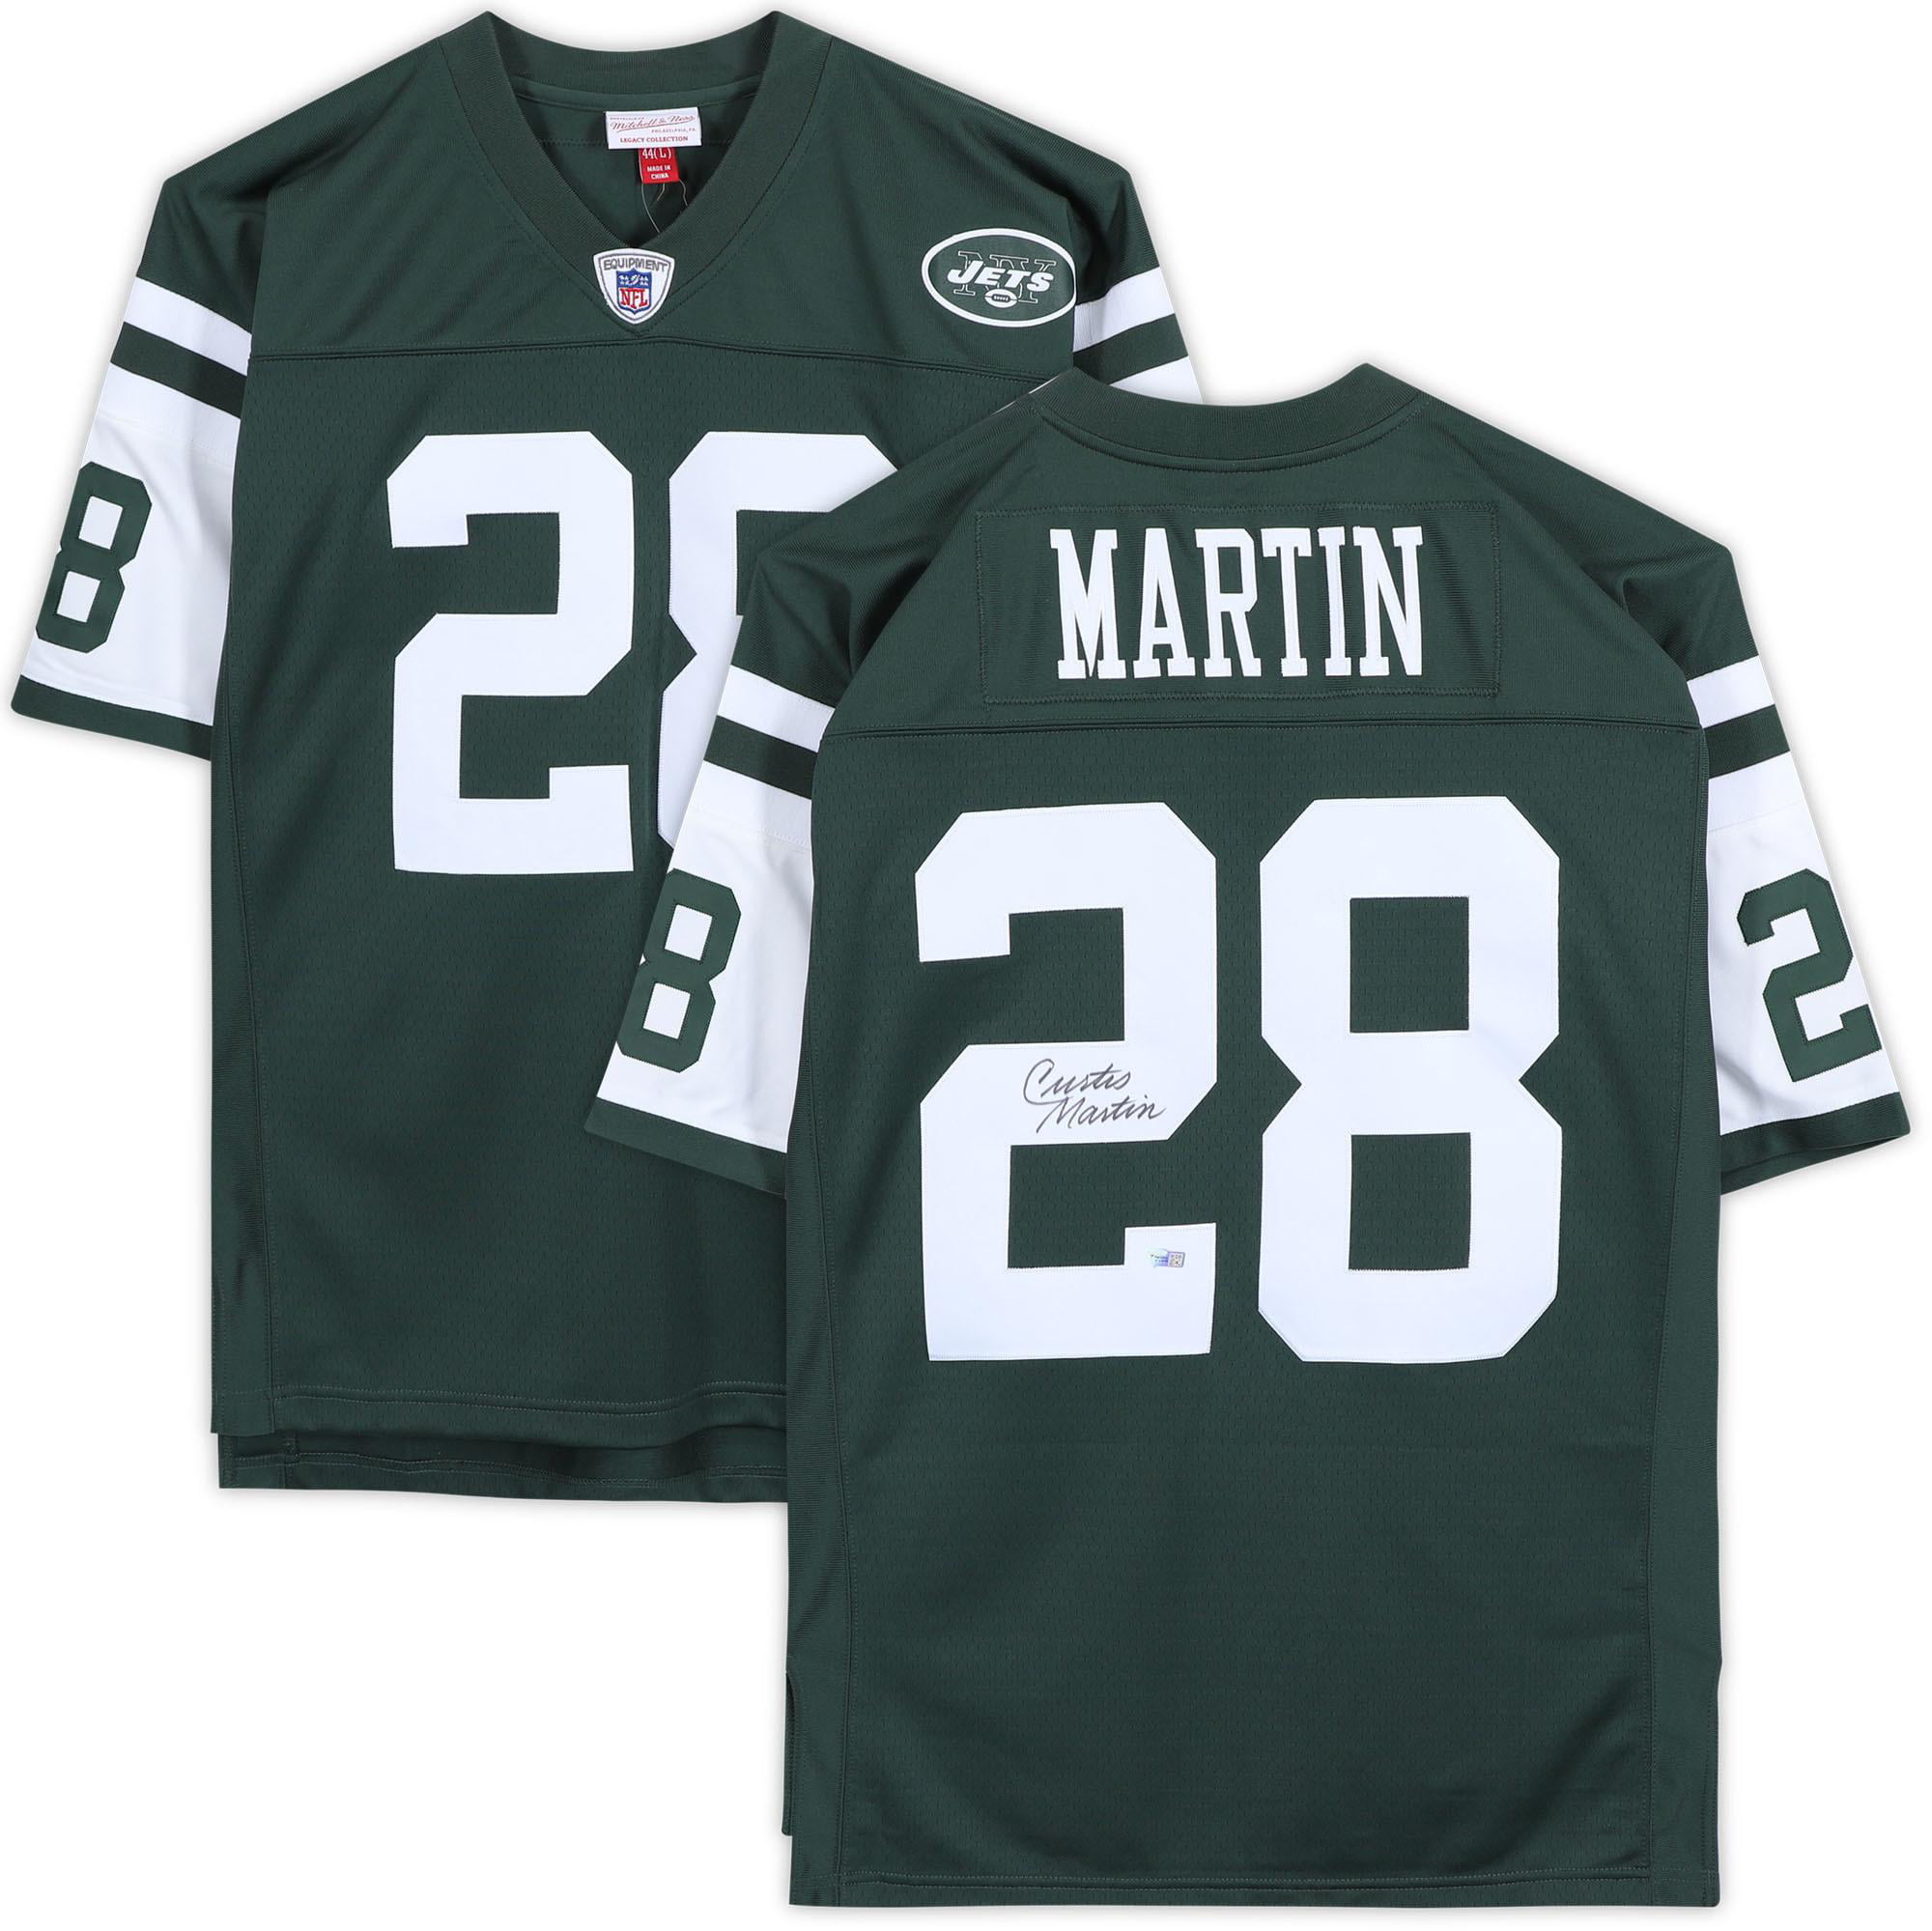 curtis martin authentic jersey